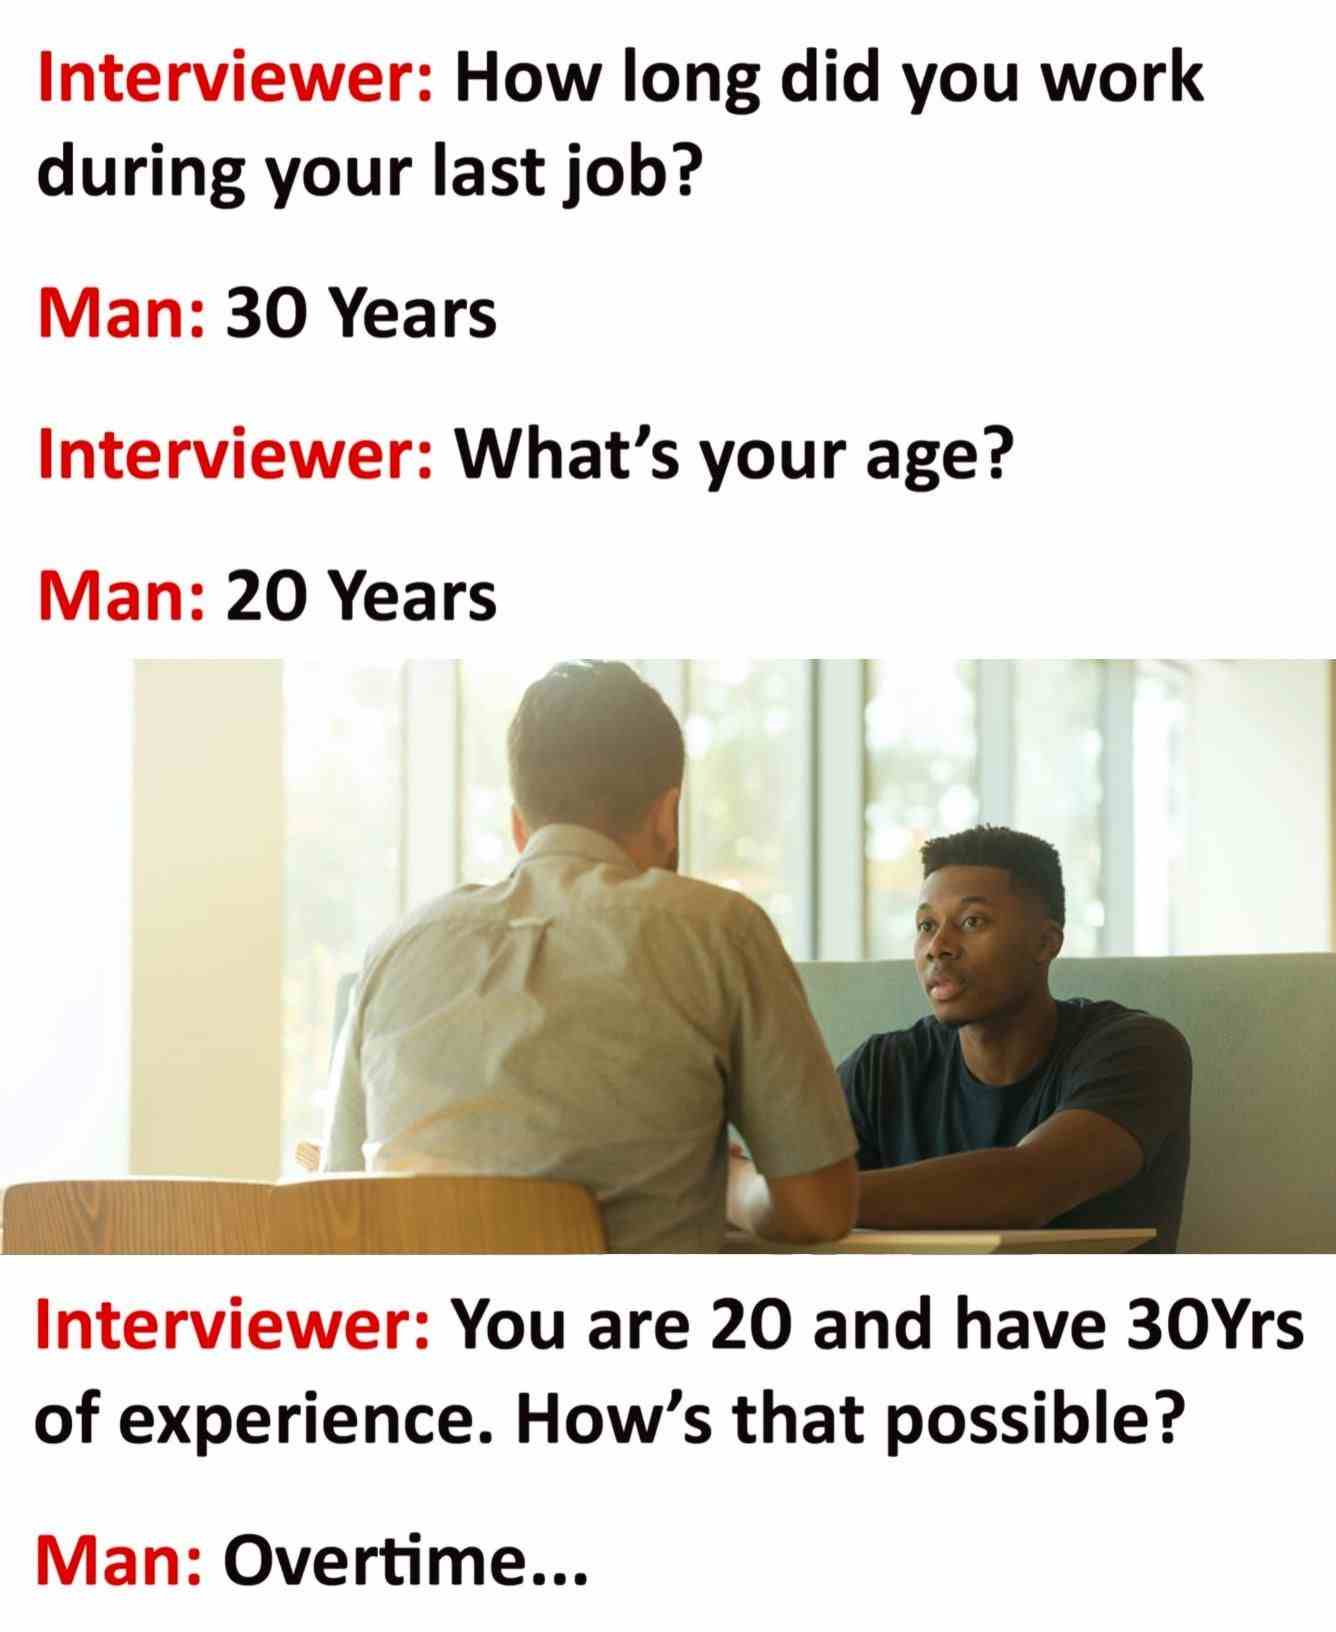 How long did you work during your last job?